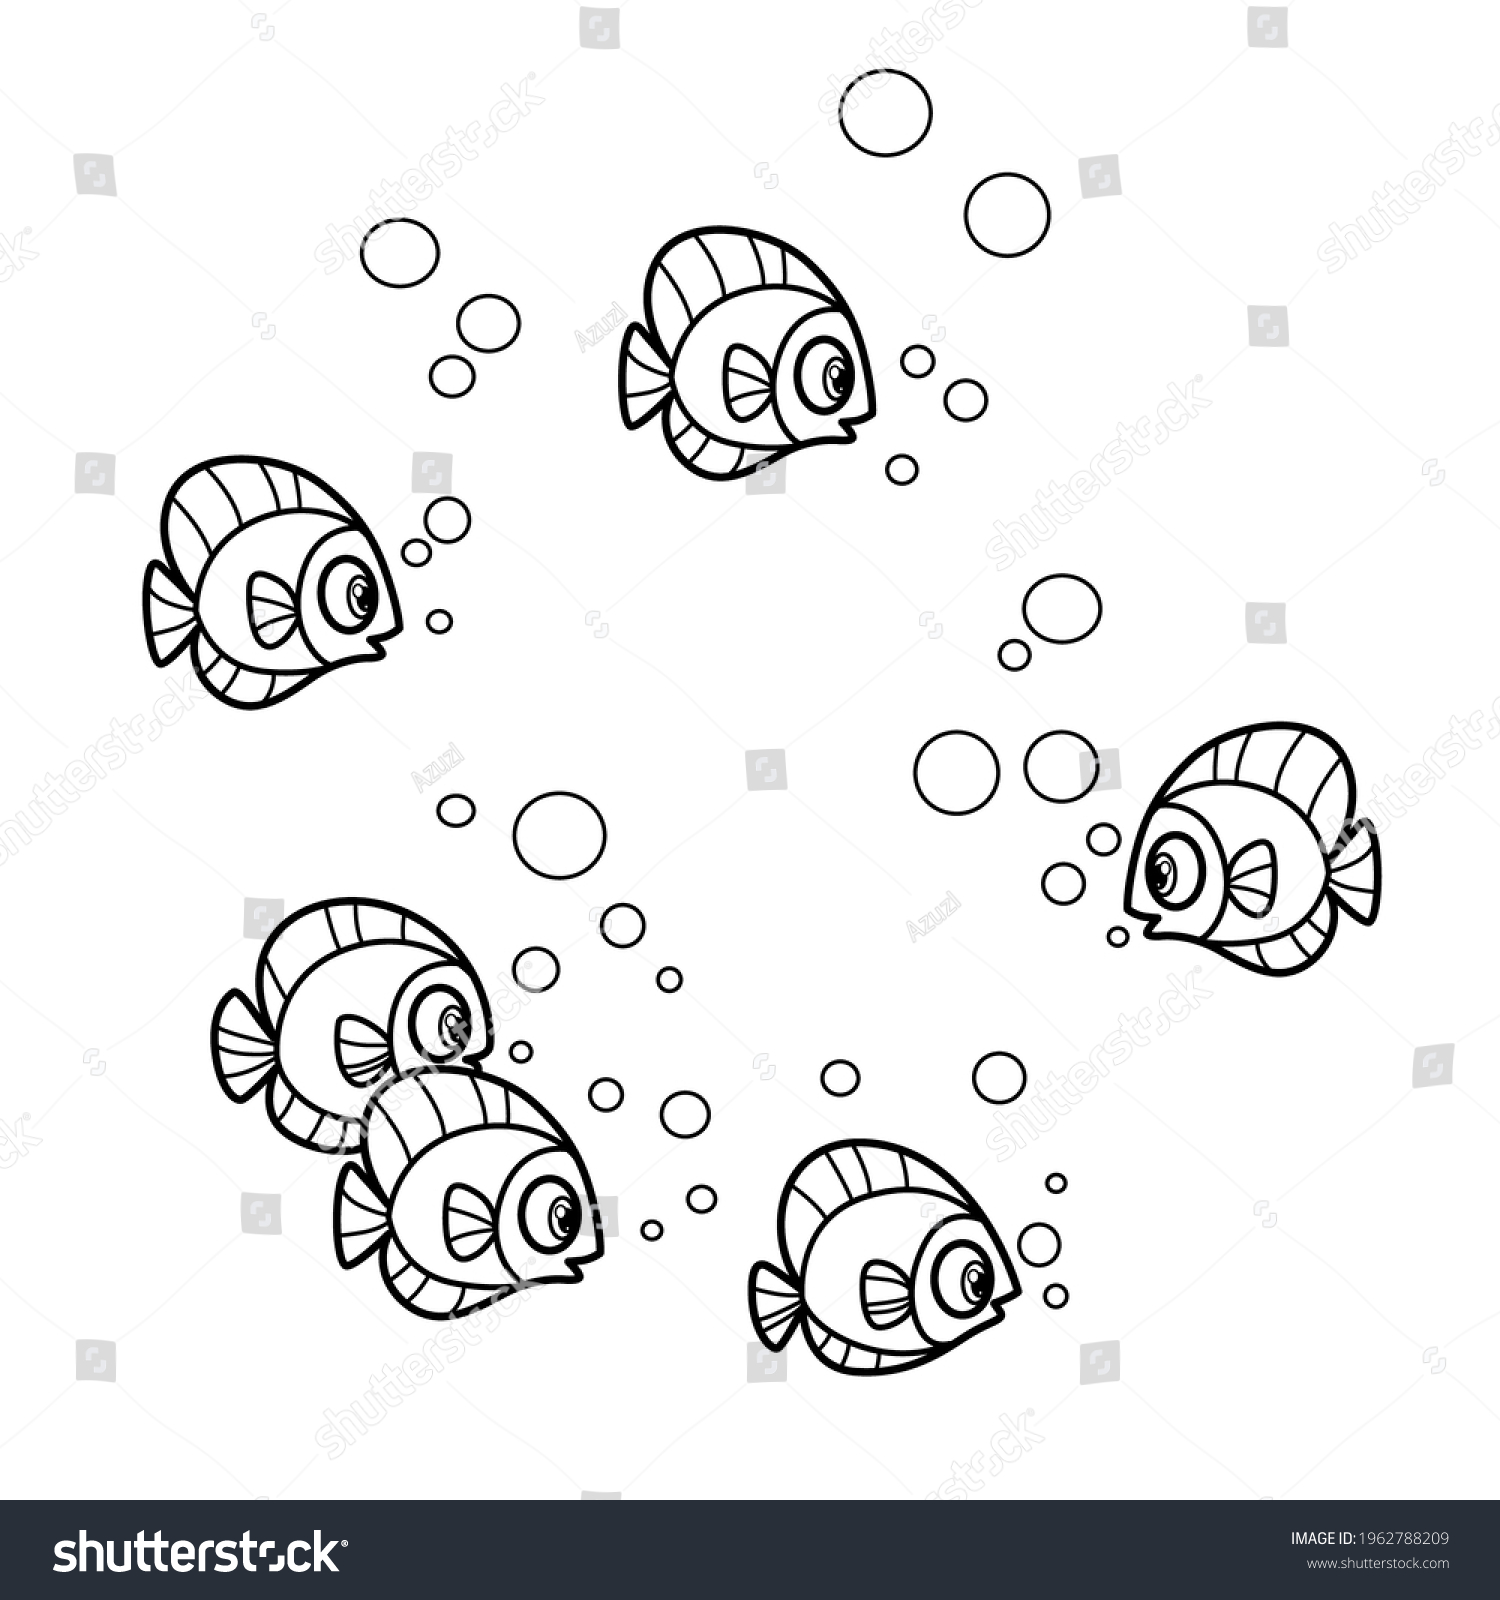 Flock Cute Sea Fish Outlined Coloring Stock Vector (Royalty Free ...